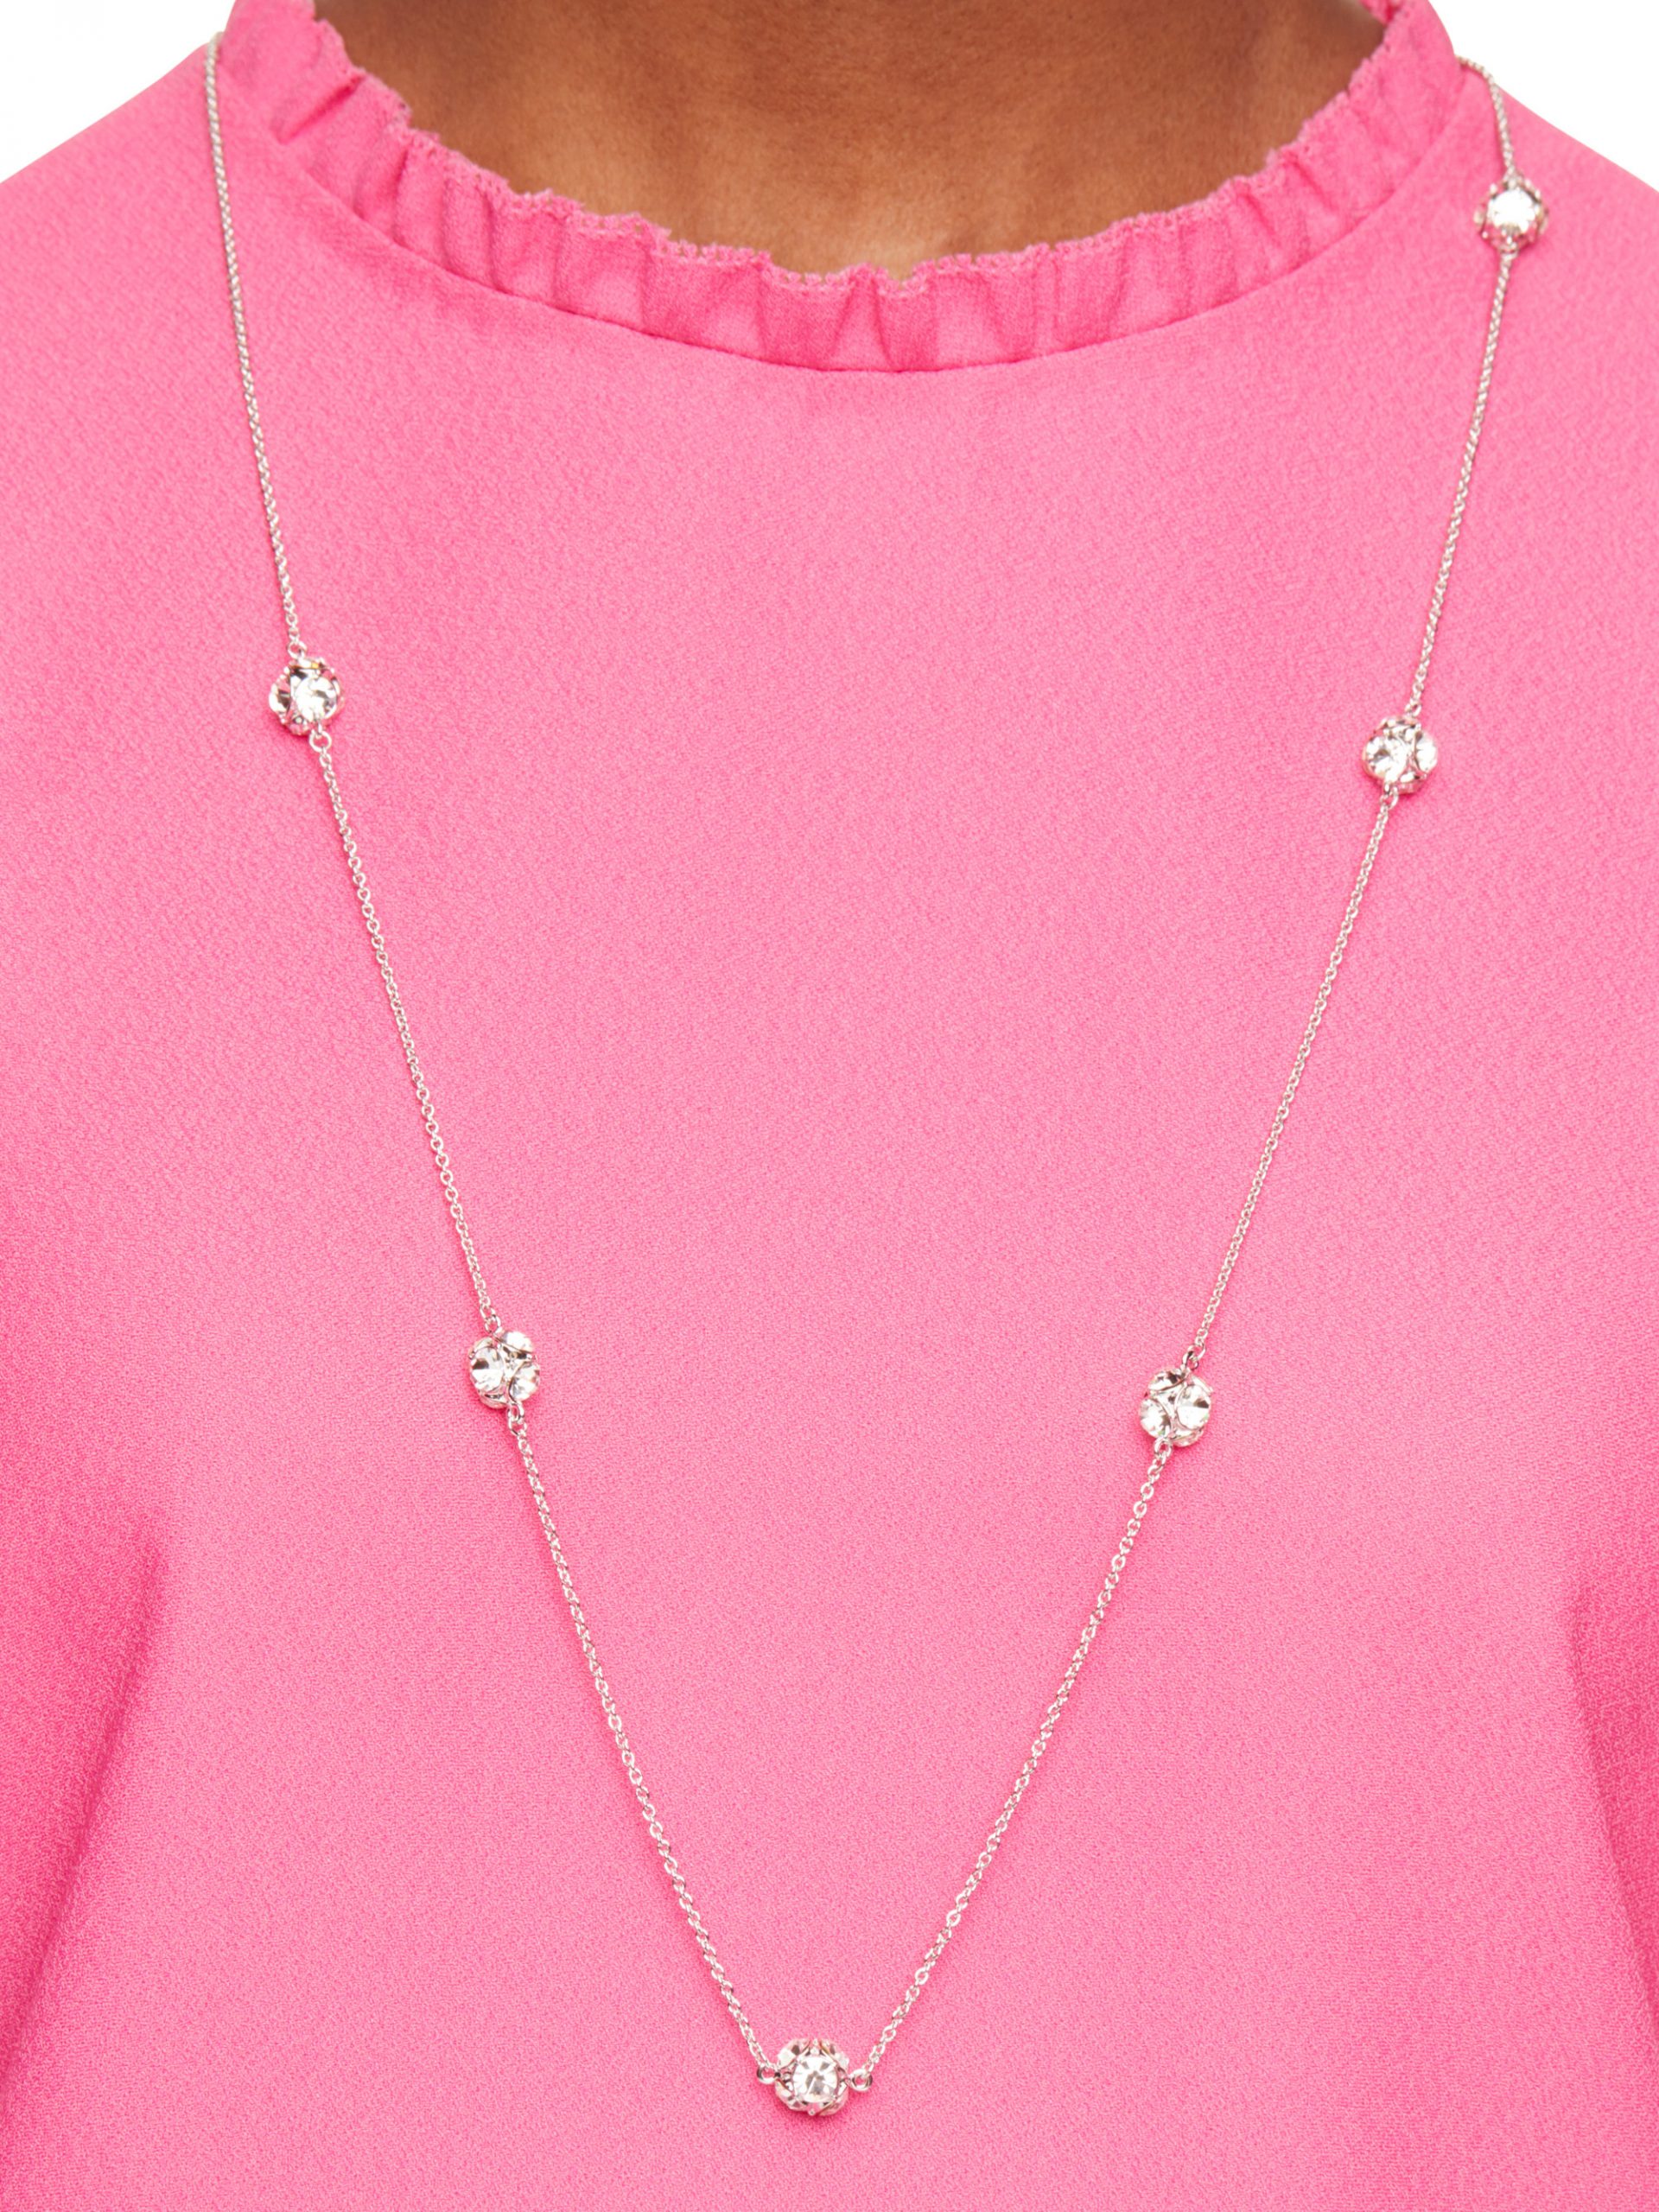 Kate Spade Lady Marmalade Scatter Necklace - Muse Beauty